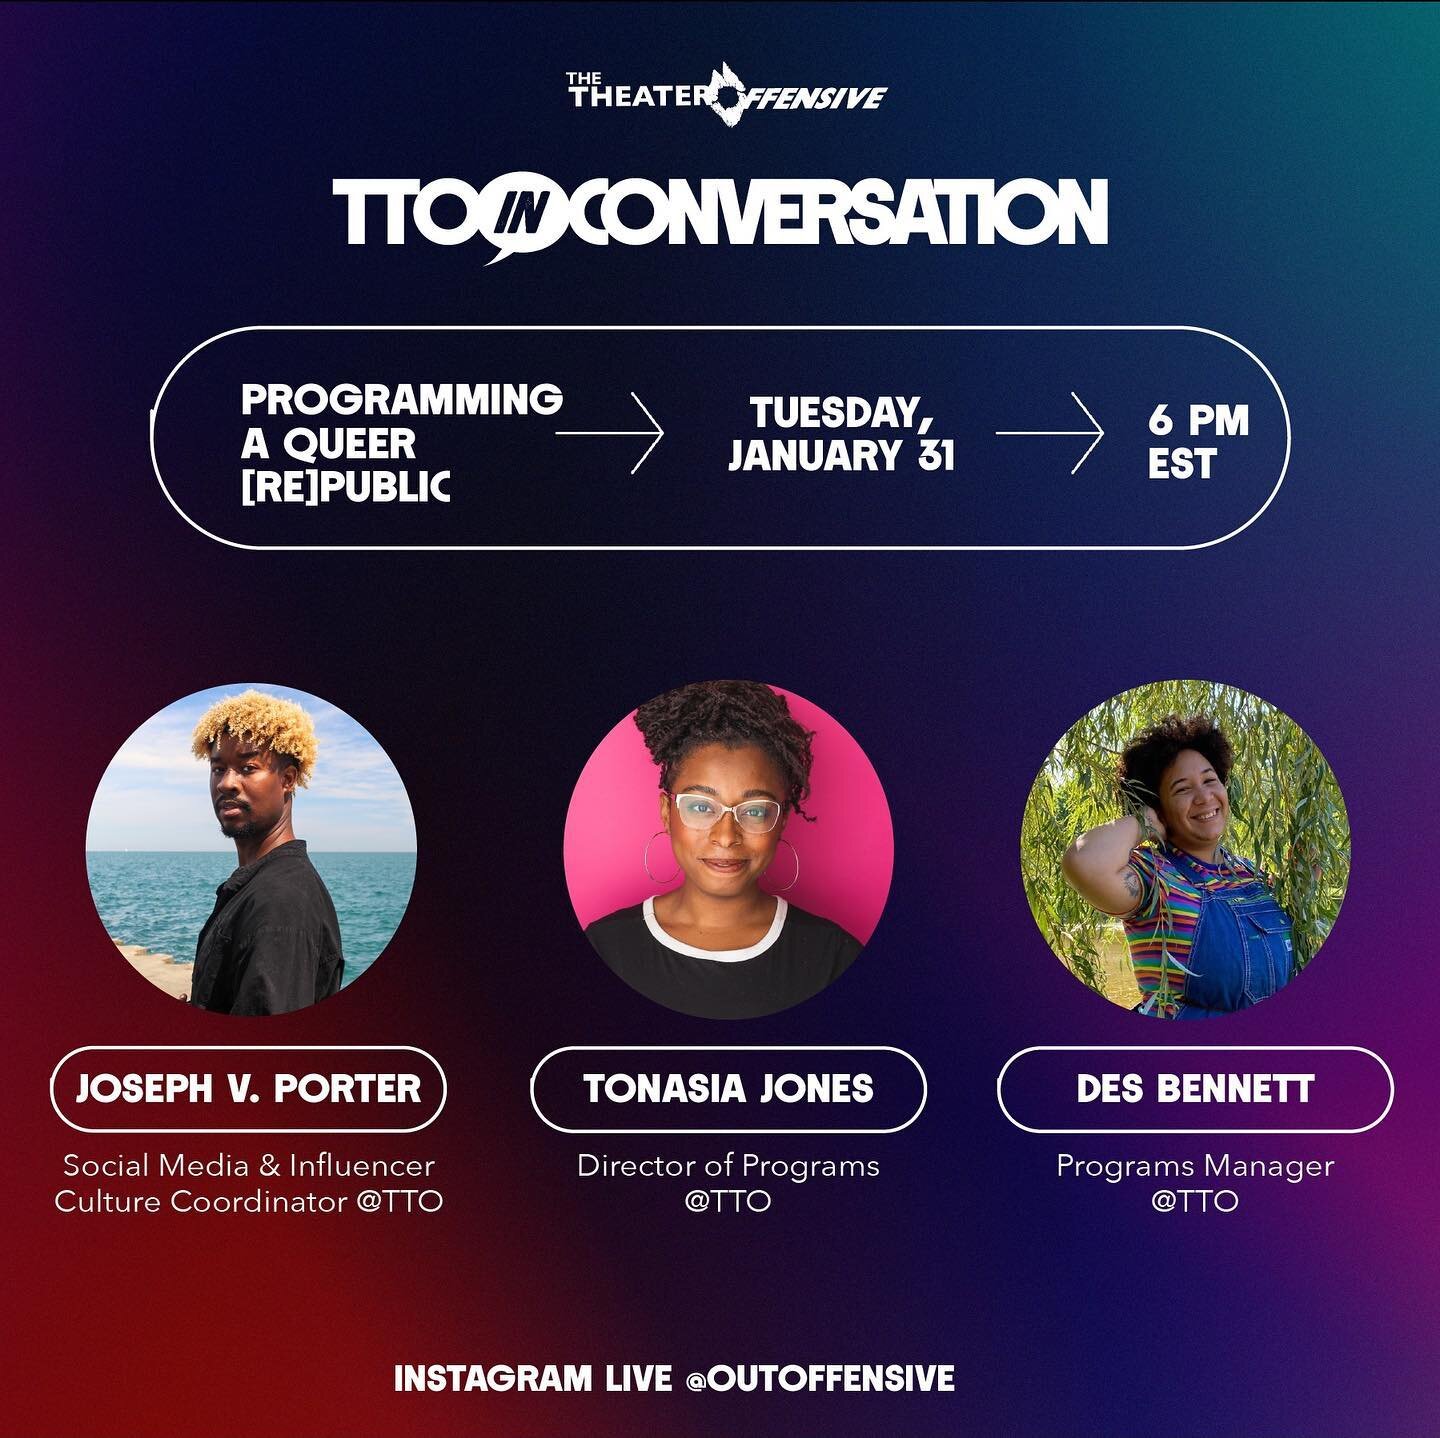 We&rsquo;re back tonight for another installation of TTO in Conversation! 

Tonight we&rsquo;re talking &ldquo;Programming a Queer Republic&rdquo; with TTO&rsquo;s Director of Programs, Tonasia Jones and Programs Manager, Des Bennett!

Send us any qu